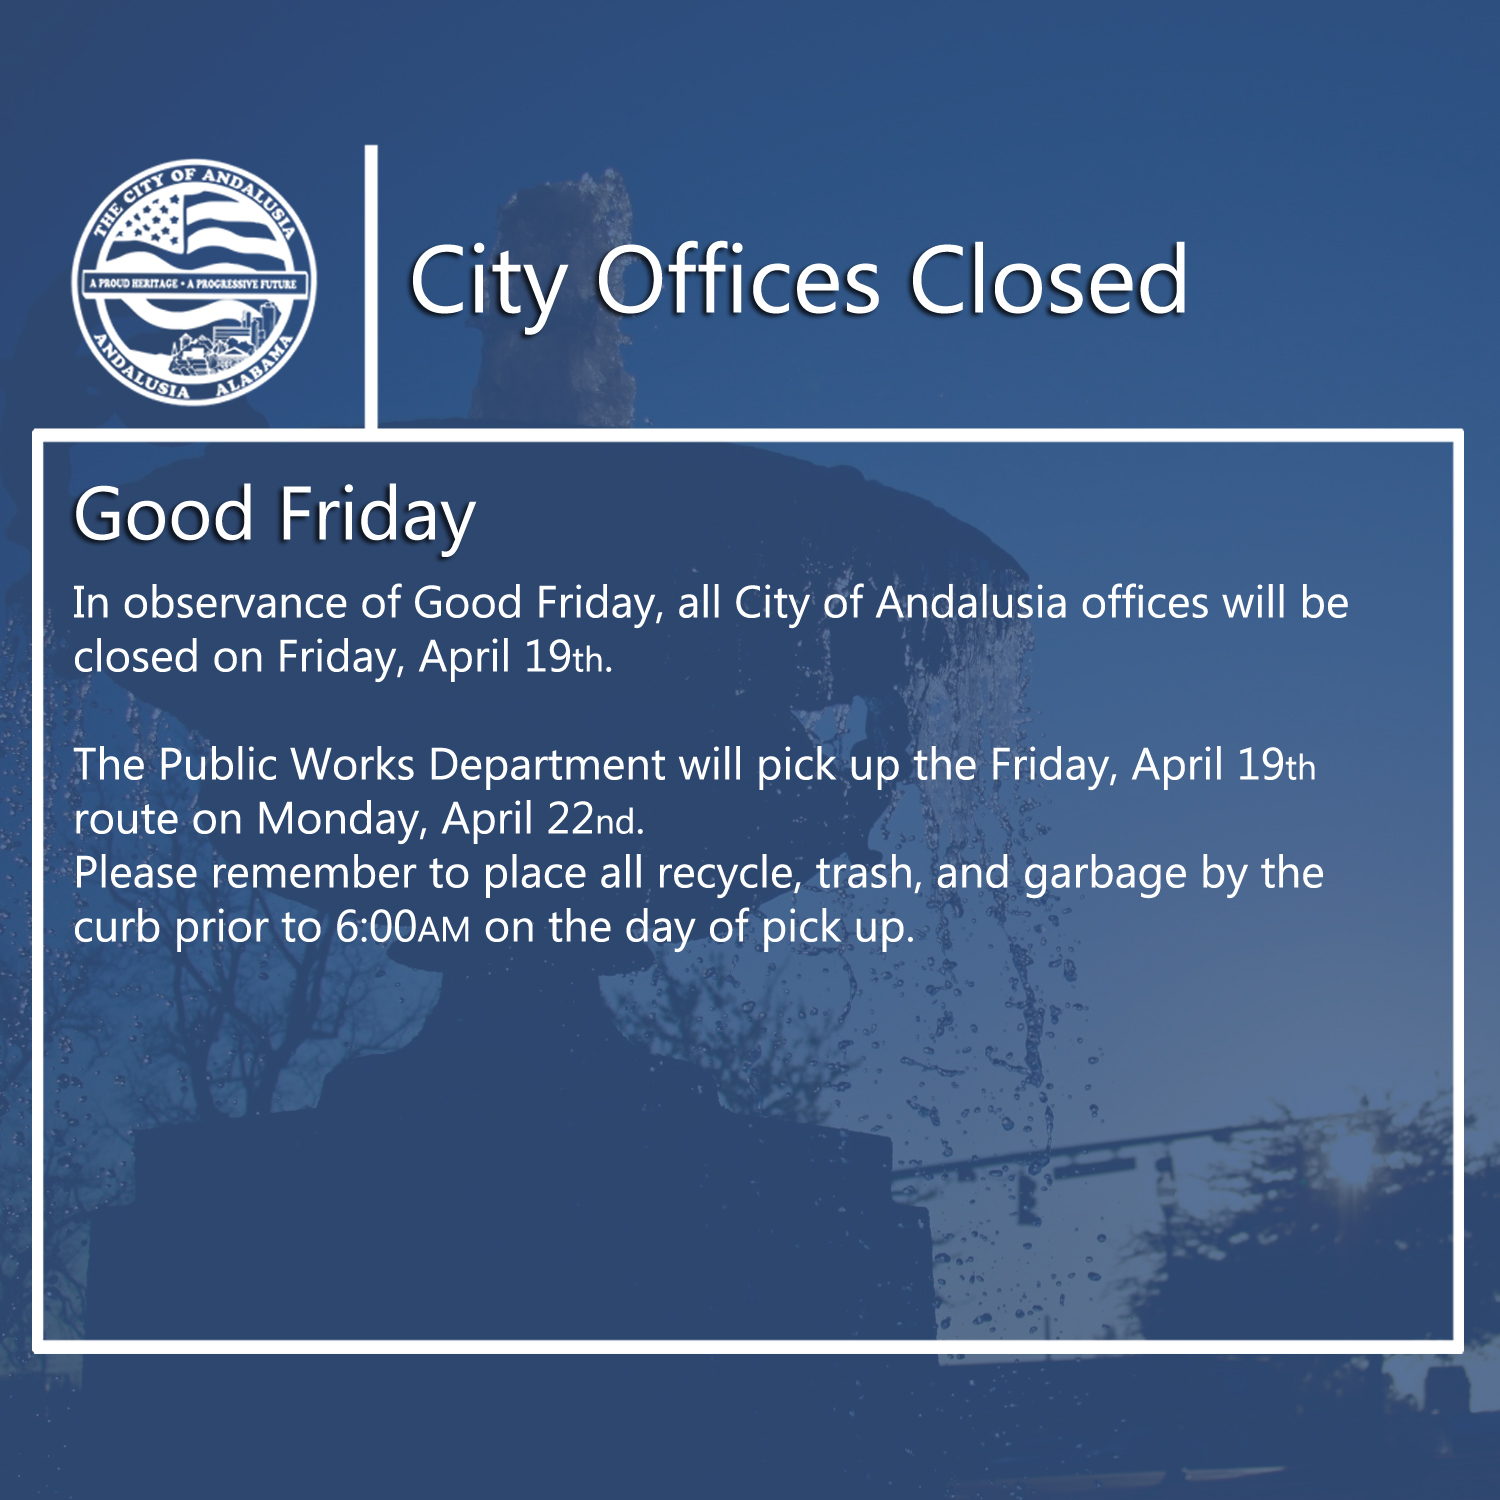 Facebook City Offices Closed Good Friday